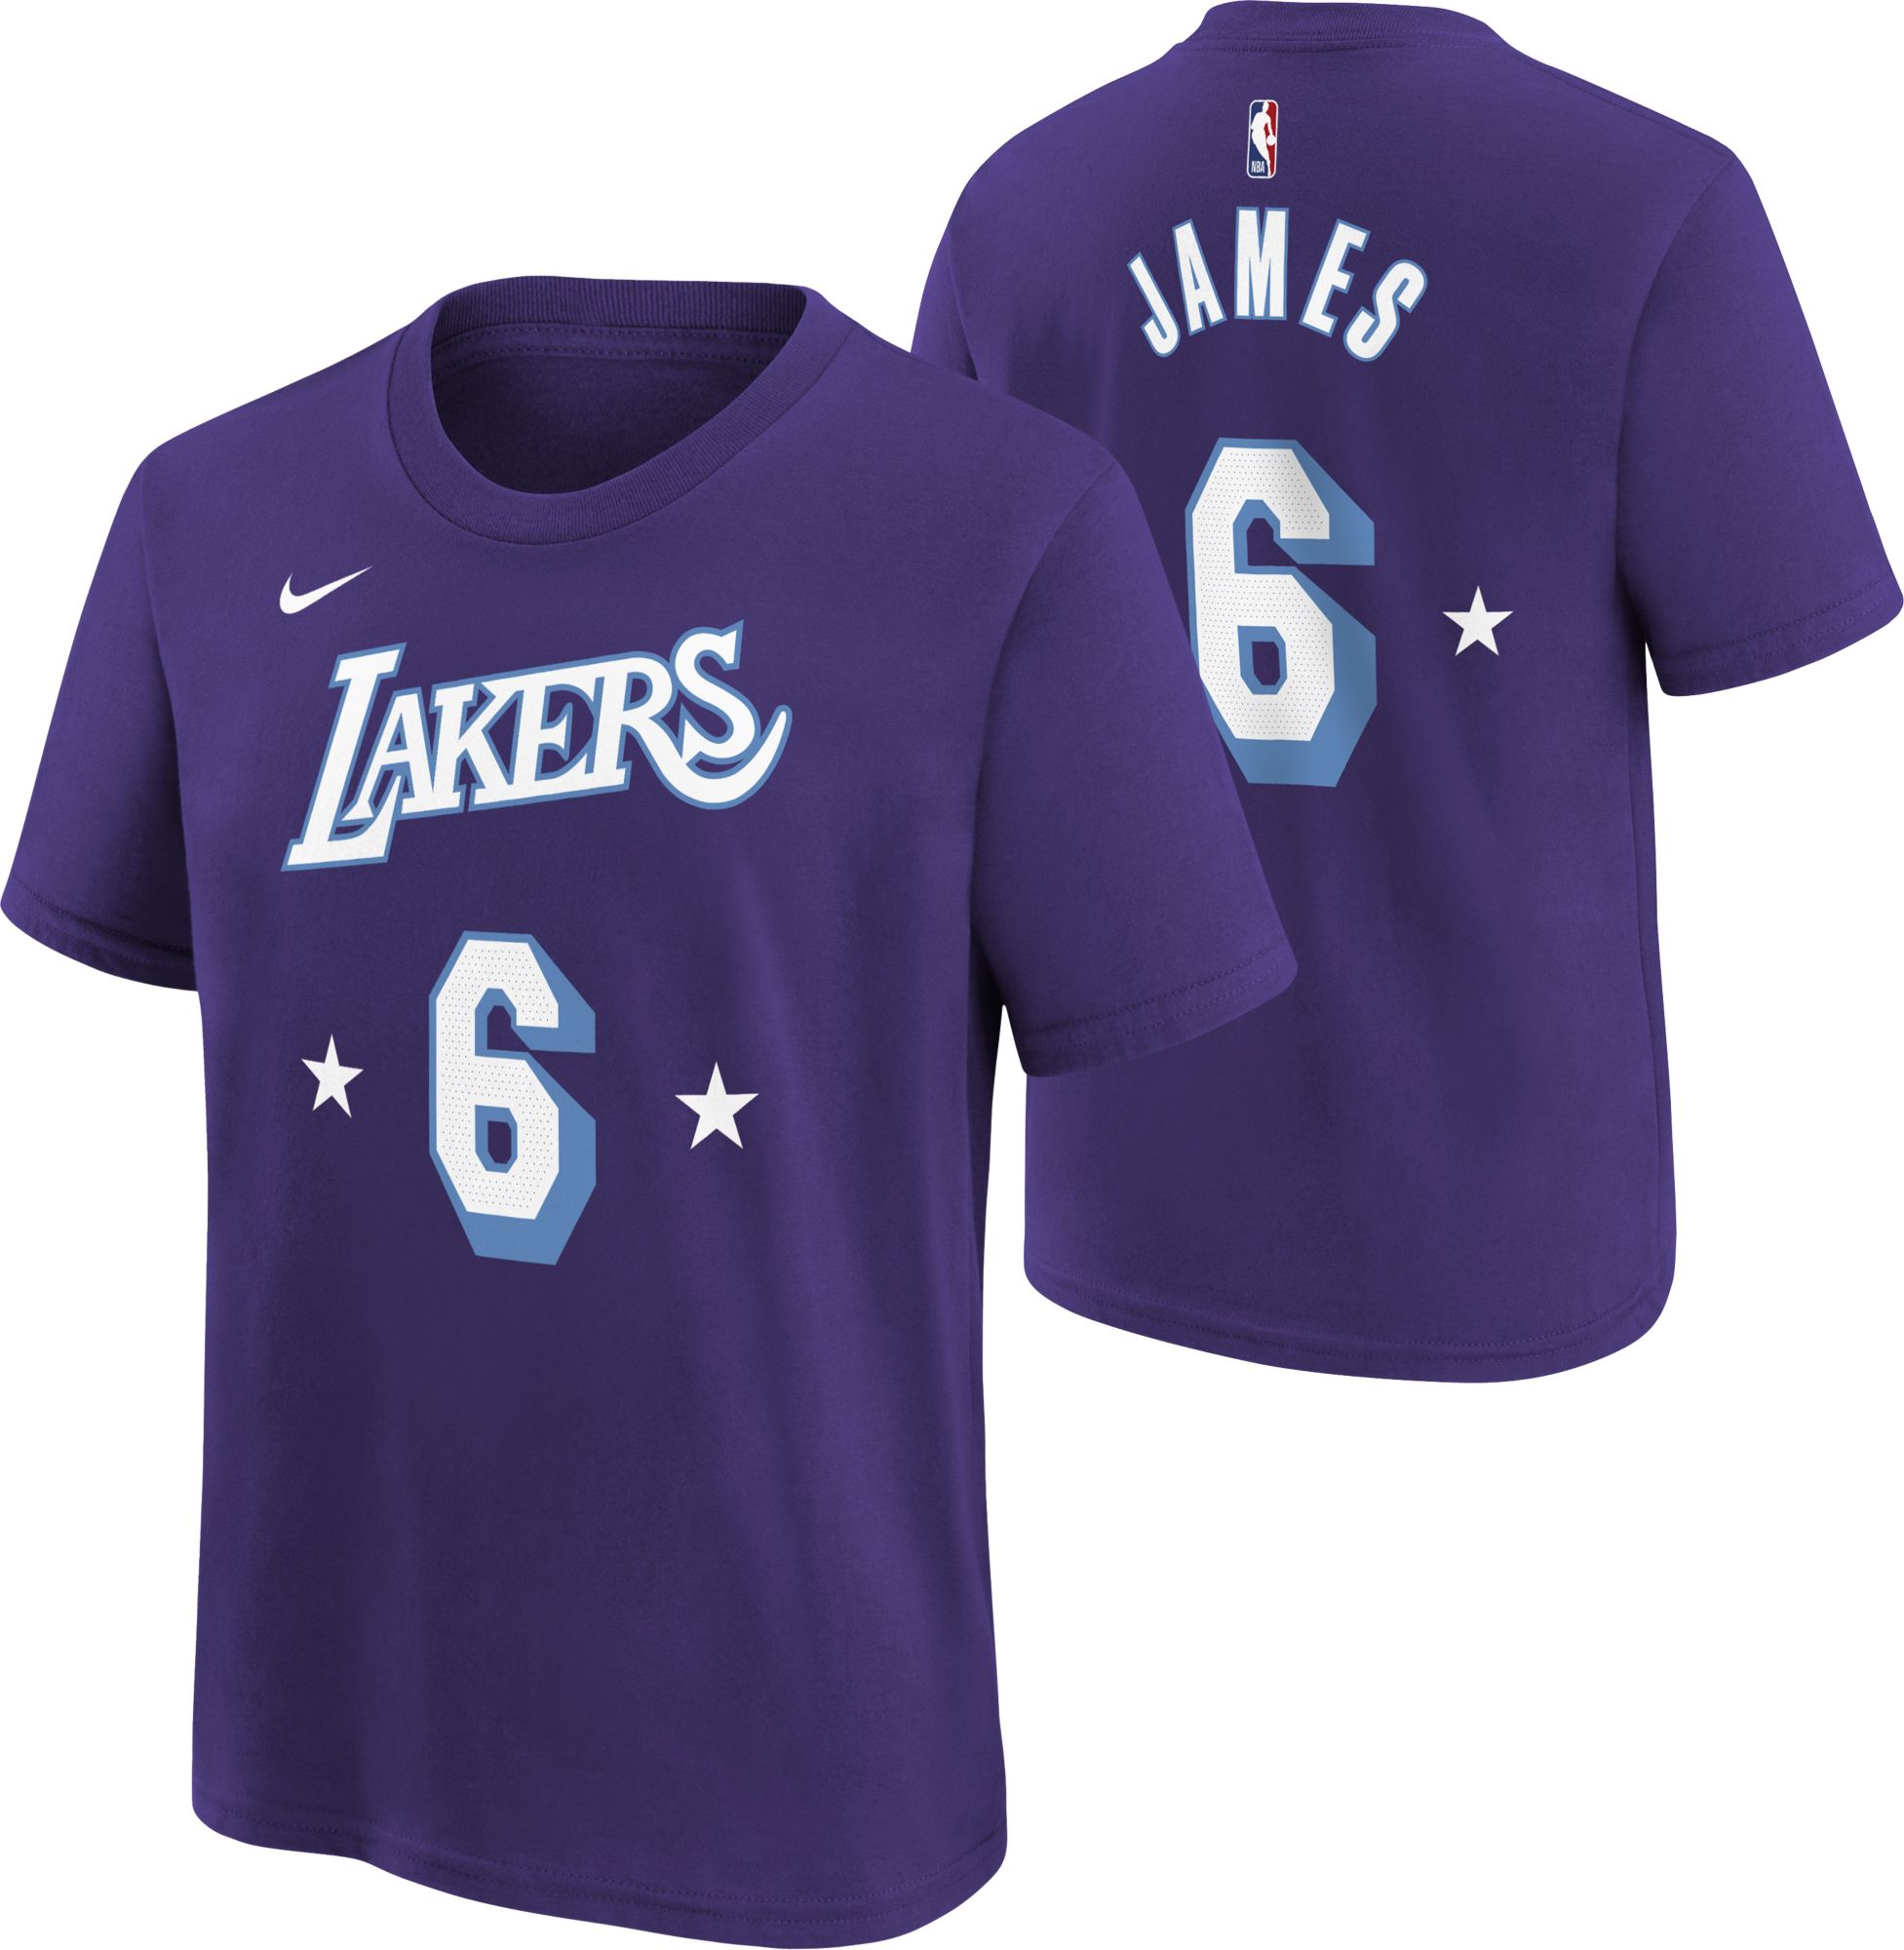 Nike / Youth 2021-22 City Edition Los Angeles Lakers LeBron James #6 Purple  Player T-Shirt